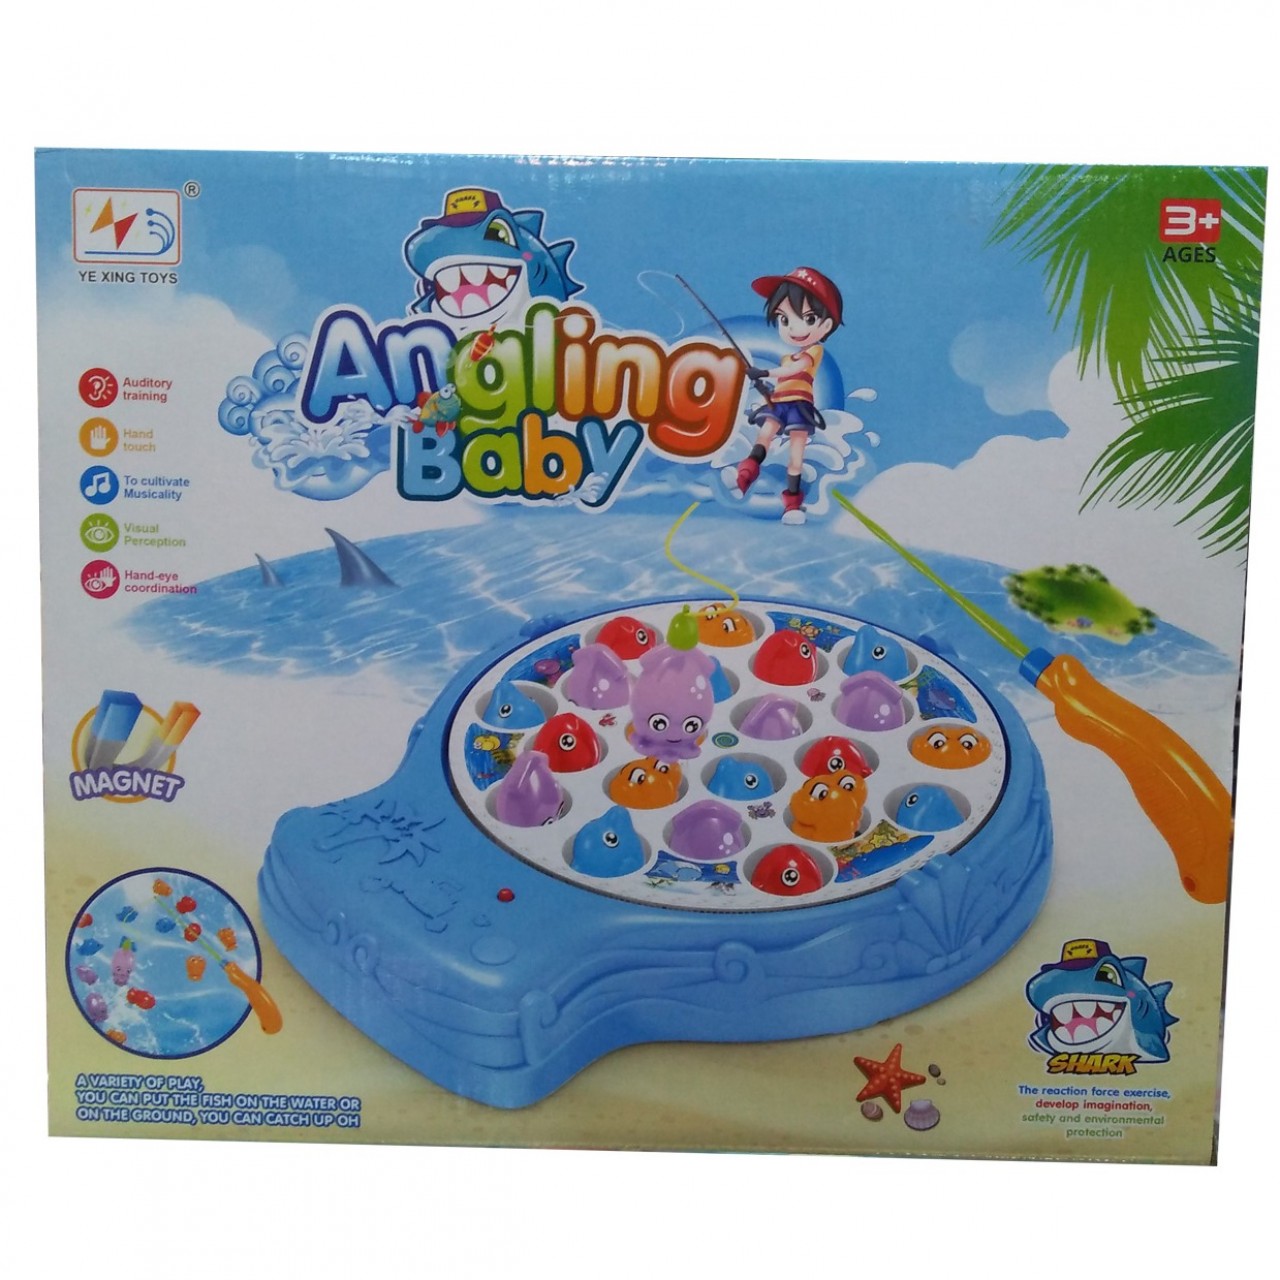 Angling Baby Fish Game For Kids - 3+ Ages